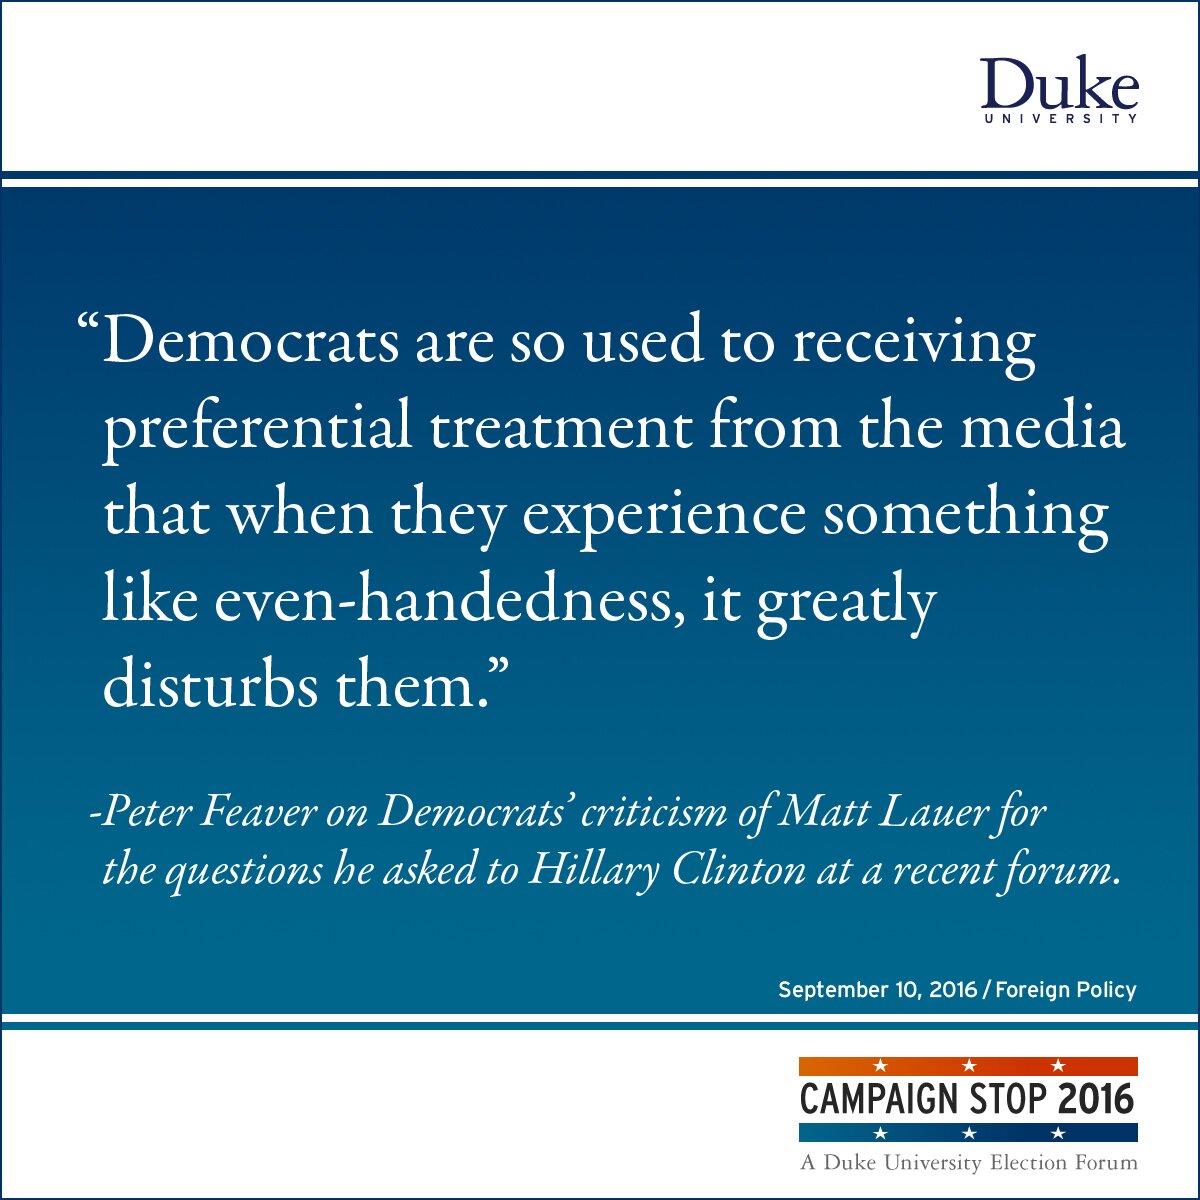 “Democrats are so used to receiving preferential treatment from the media that when they experience something like even-handedness, it greatly disturbs them.” -Peter Feaver on Democrats’ criticism of Matt Lauer for the questions he asked to Hillary Clinton at a recent forum.